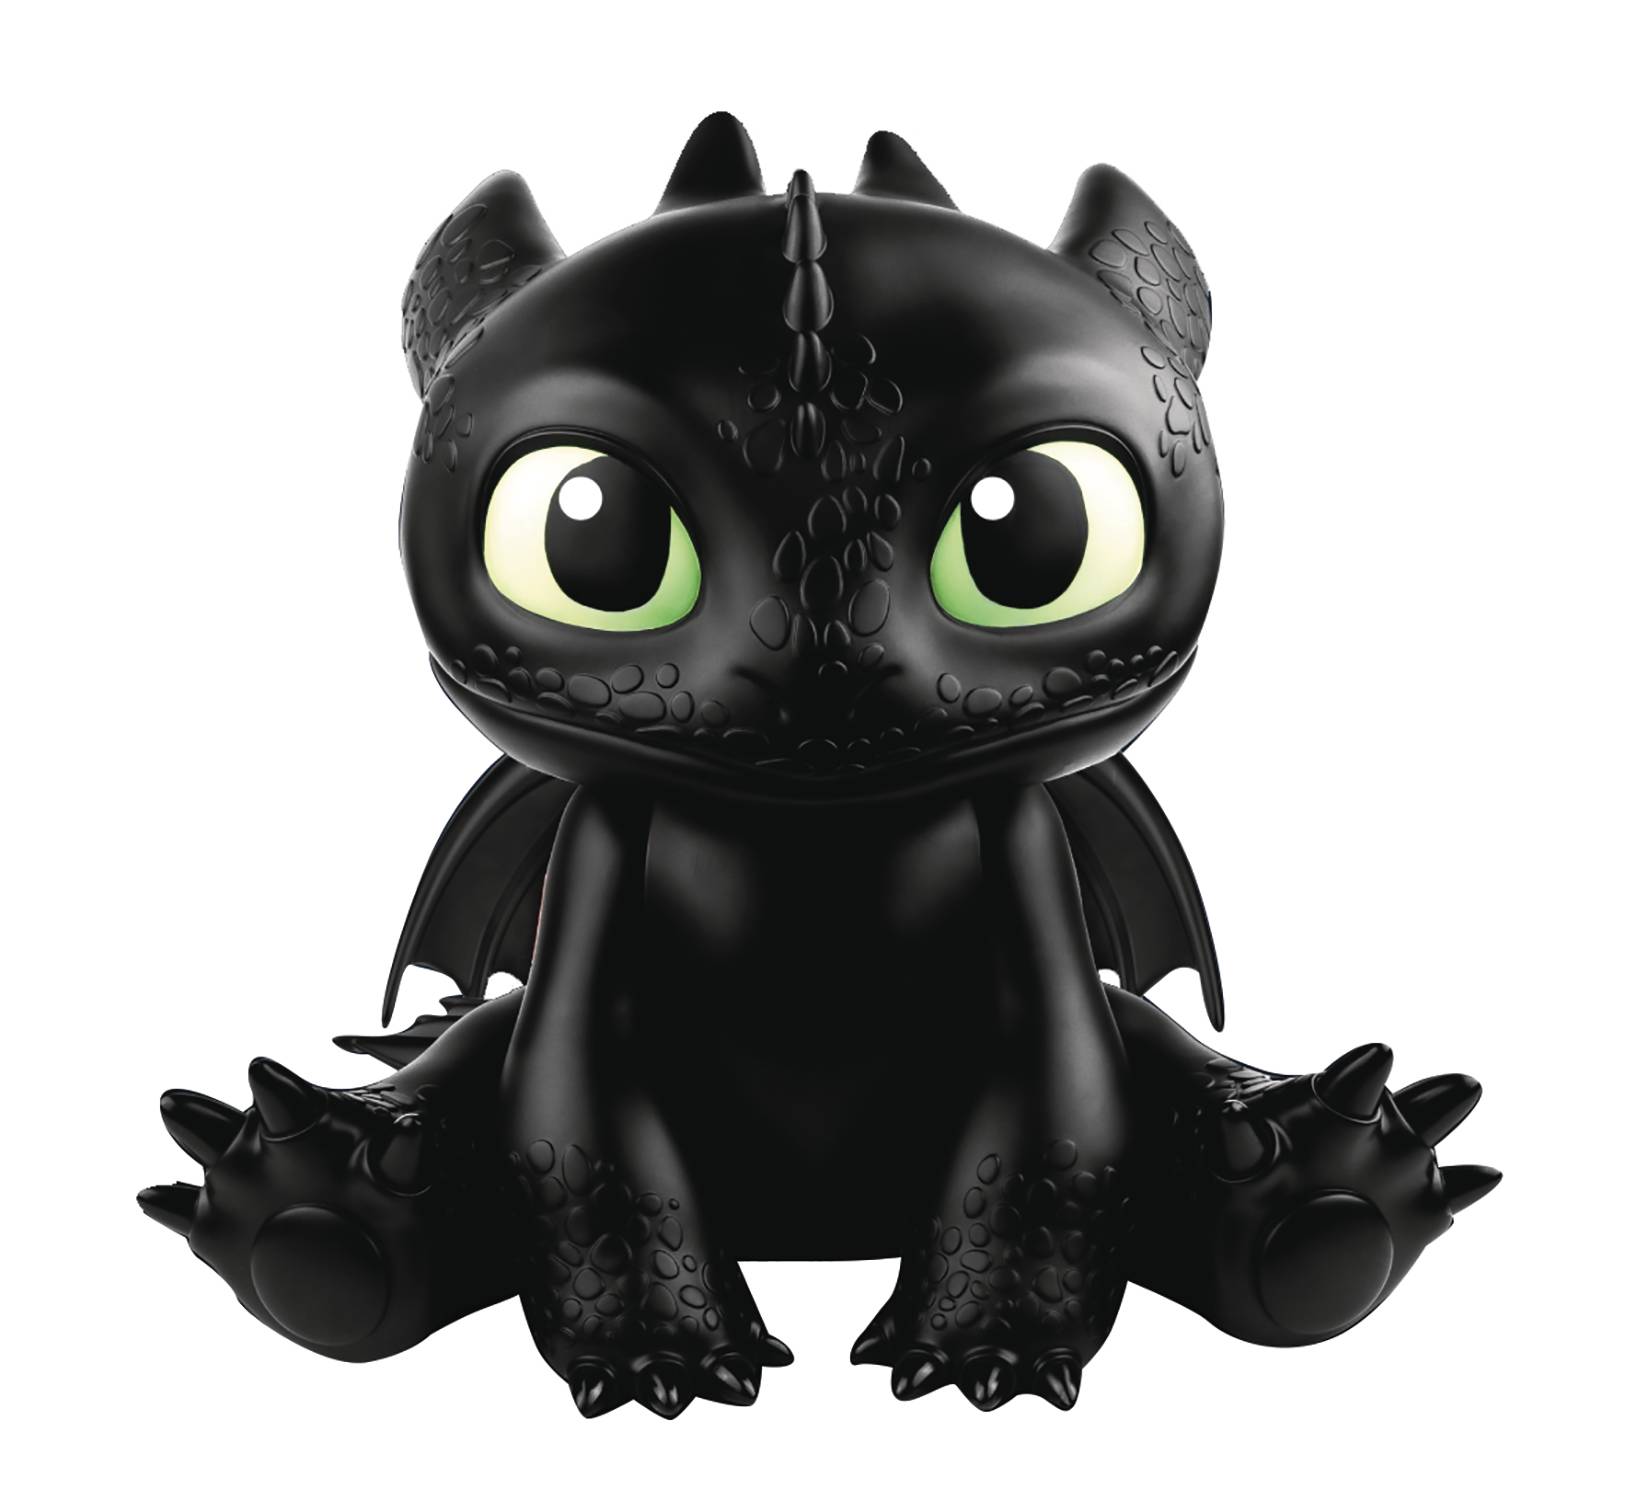 ayush ahalawat recommends how to train your dragon images of toothless pic